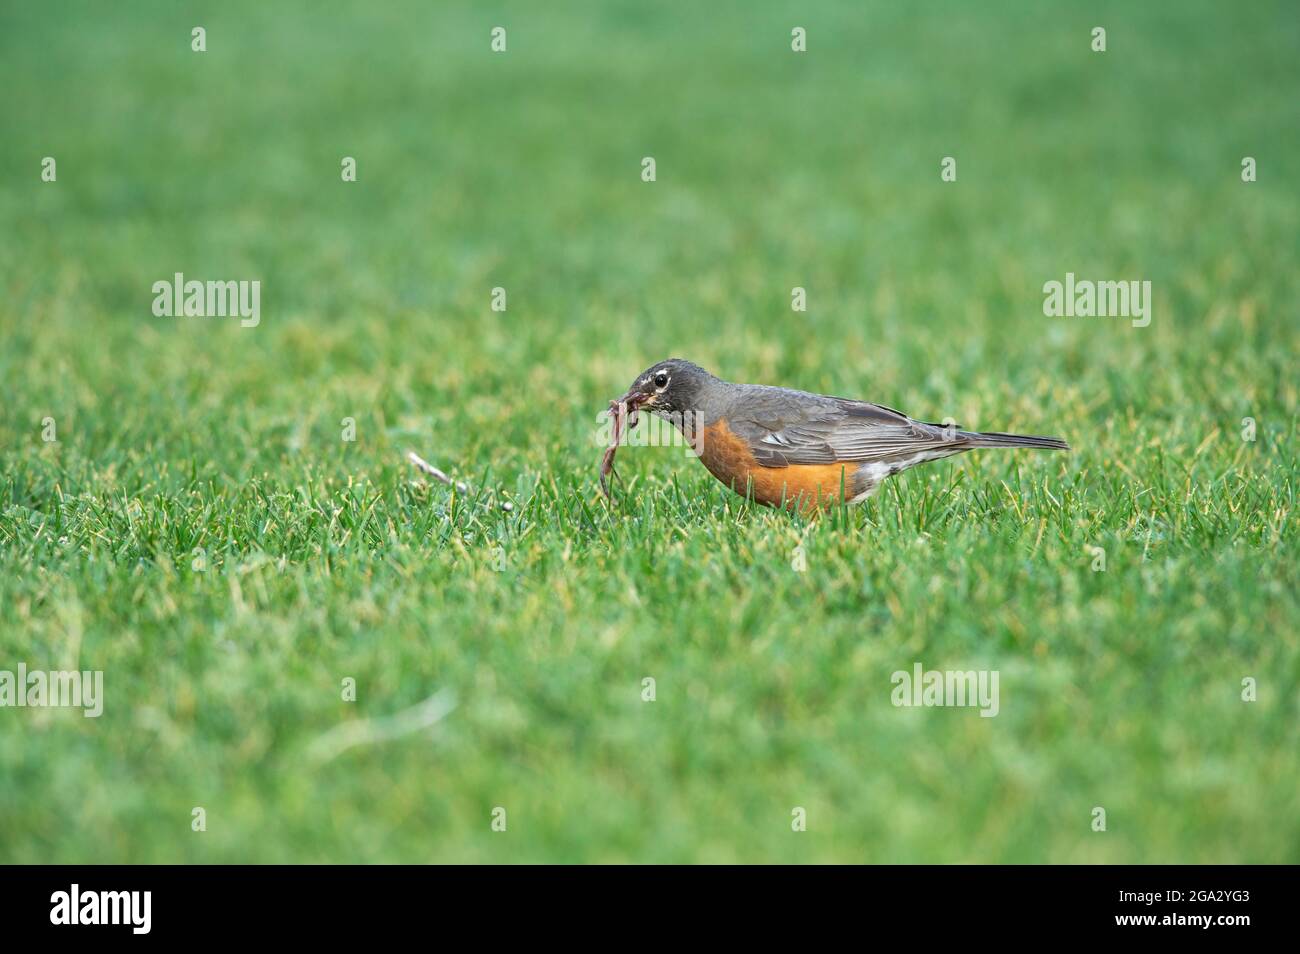 An American Robin with a mouth full of worms on a lawn Stock Photo